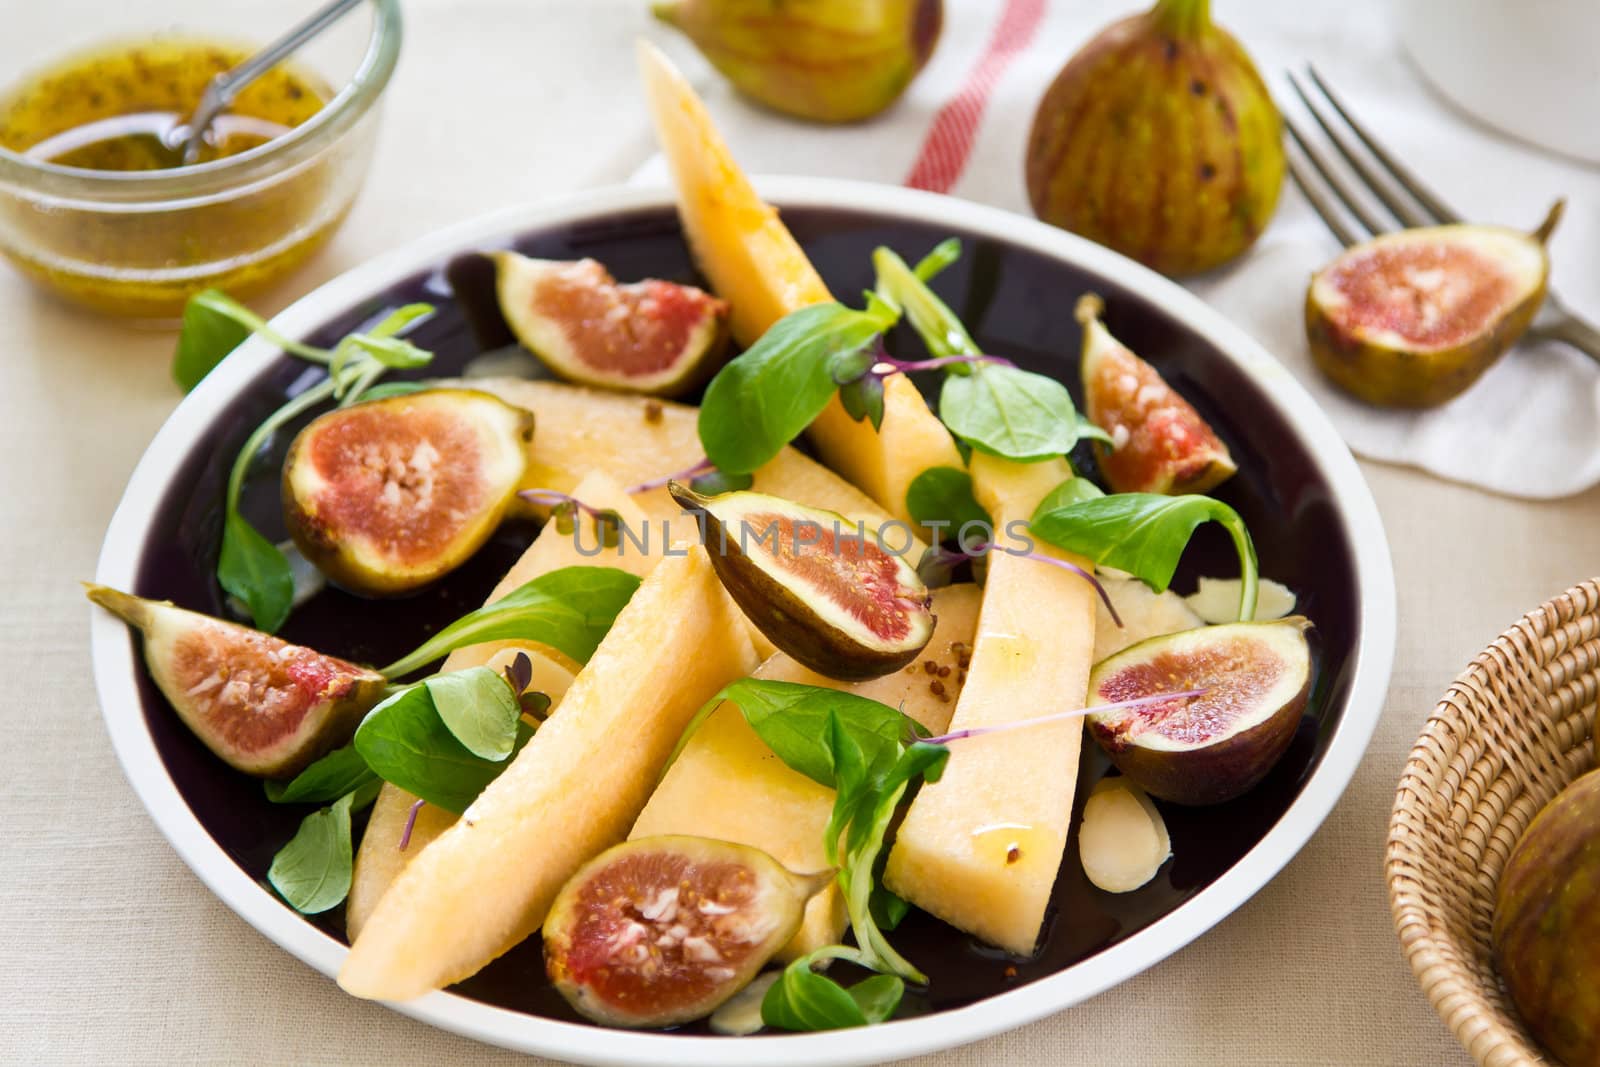 Fig,Cantaloupe and almond salad by vanillaechoes